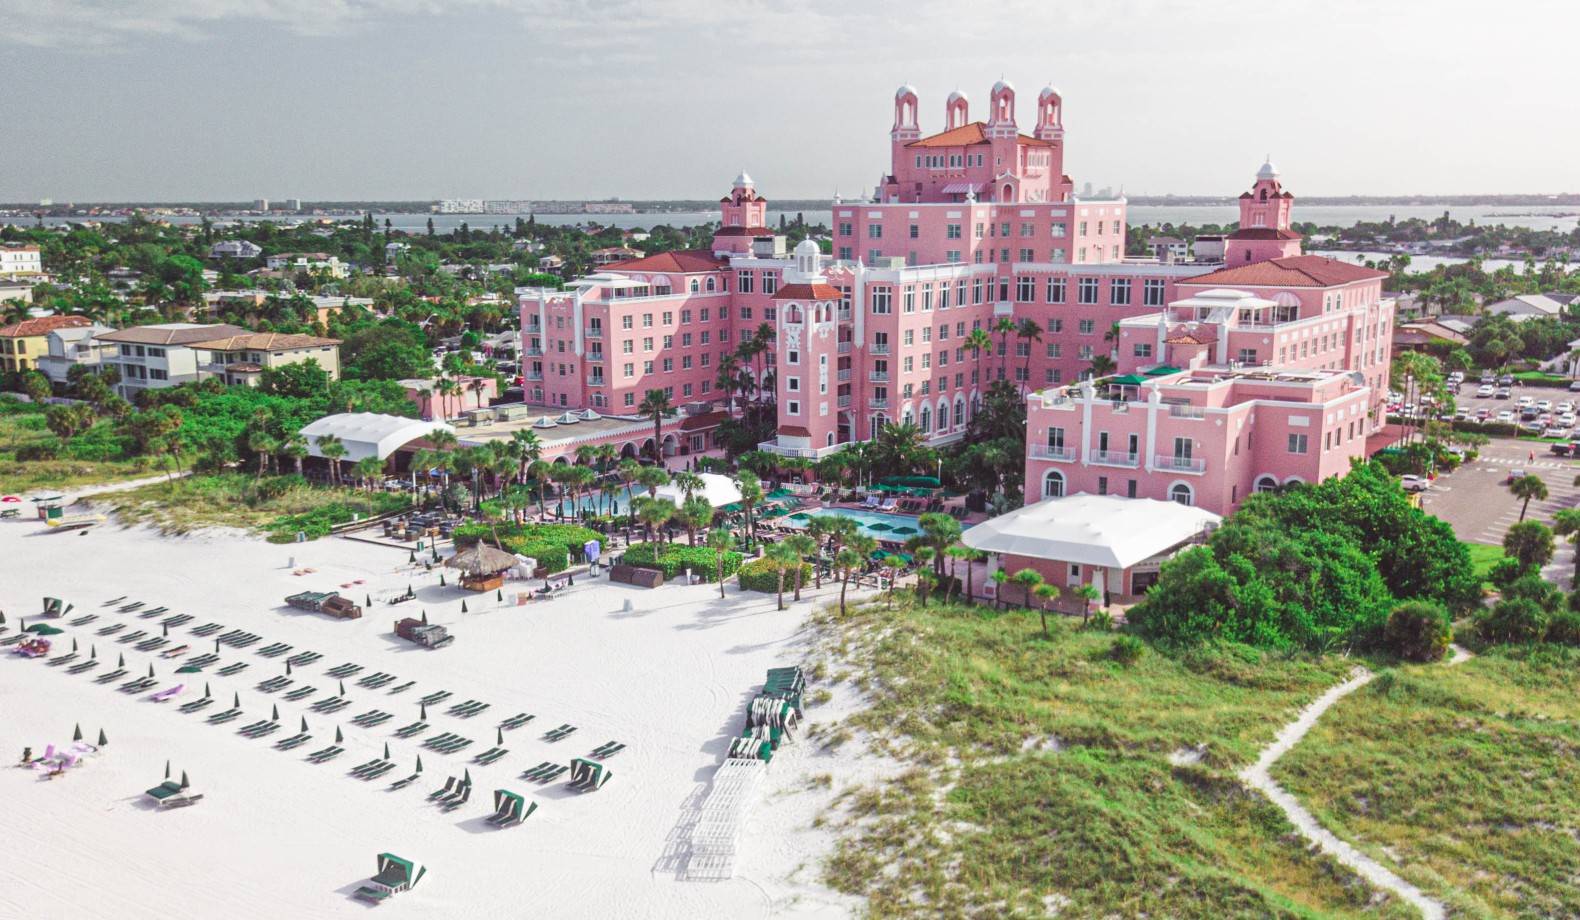 The Don CeSar hotel from above (Image: Courtesy of VisitStPeteClearwater.com)